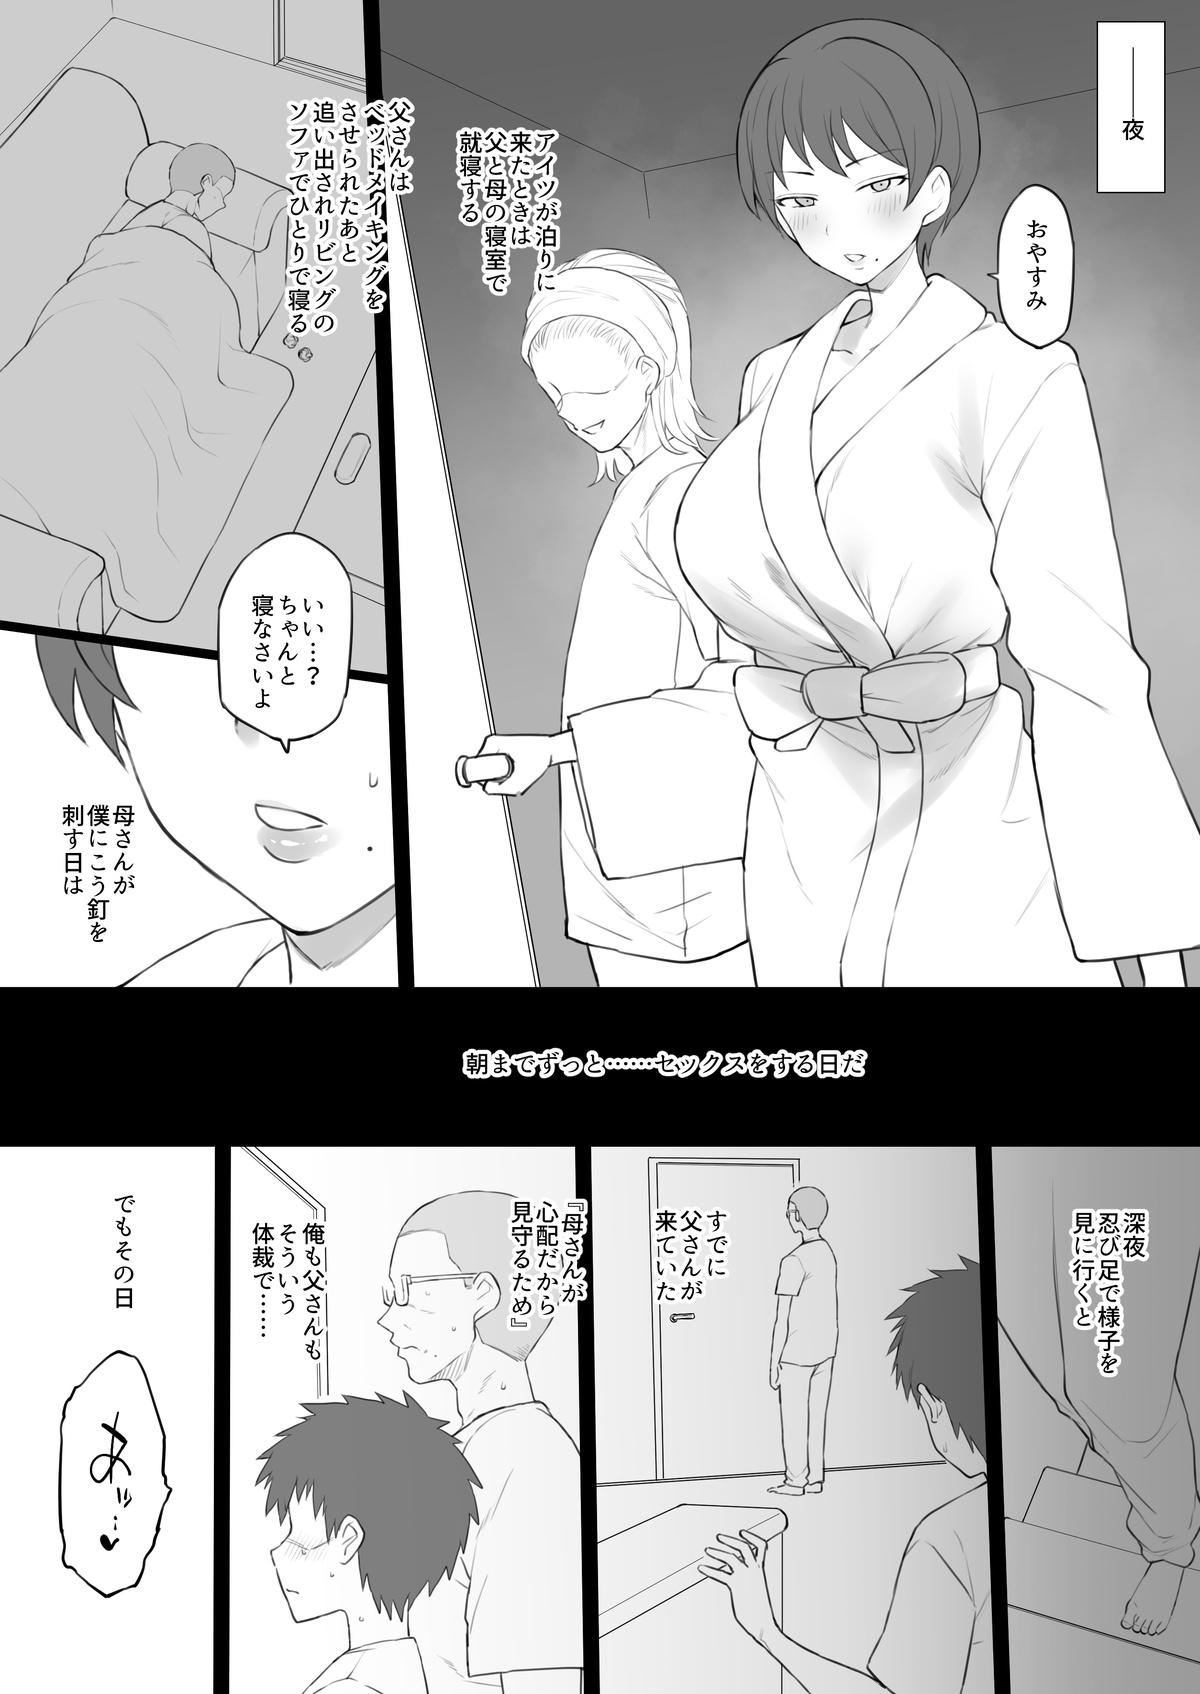 Transexual 奴隷家族 Leche - Page 4